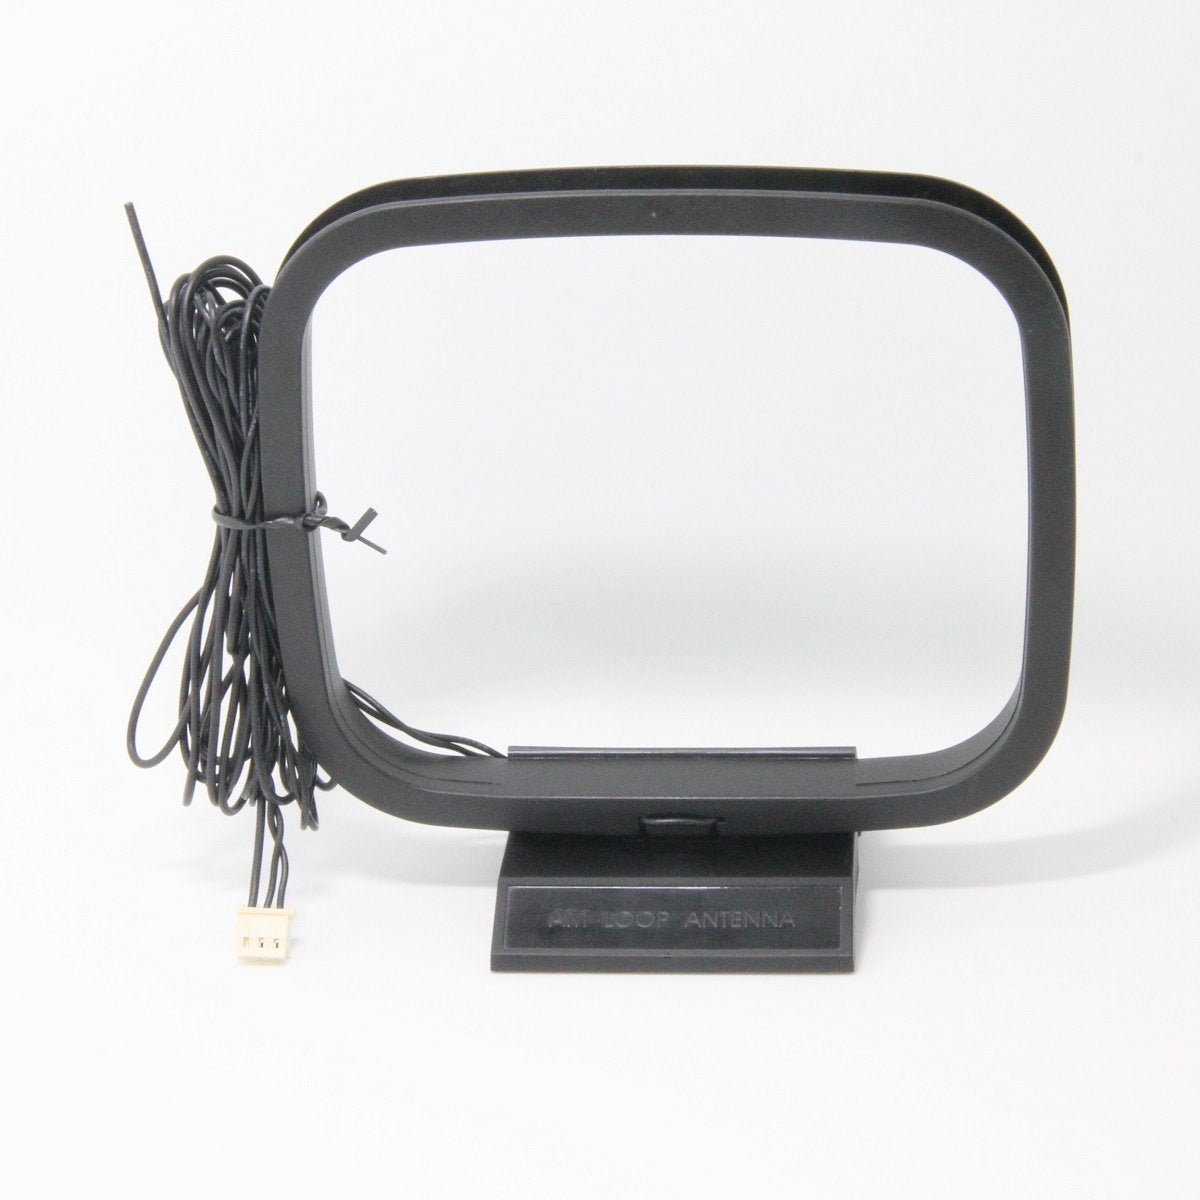 Replacement FM antenna for Sony MHC HCD – Ancable